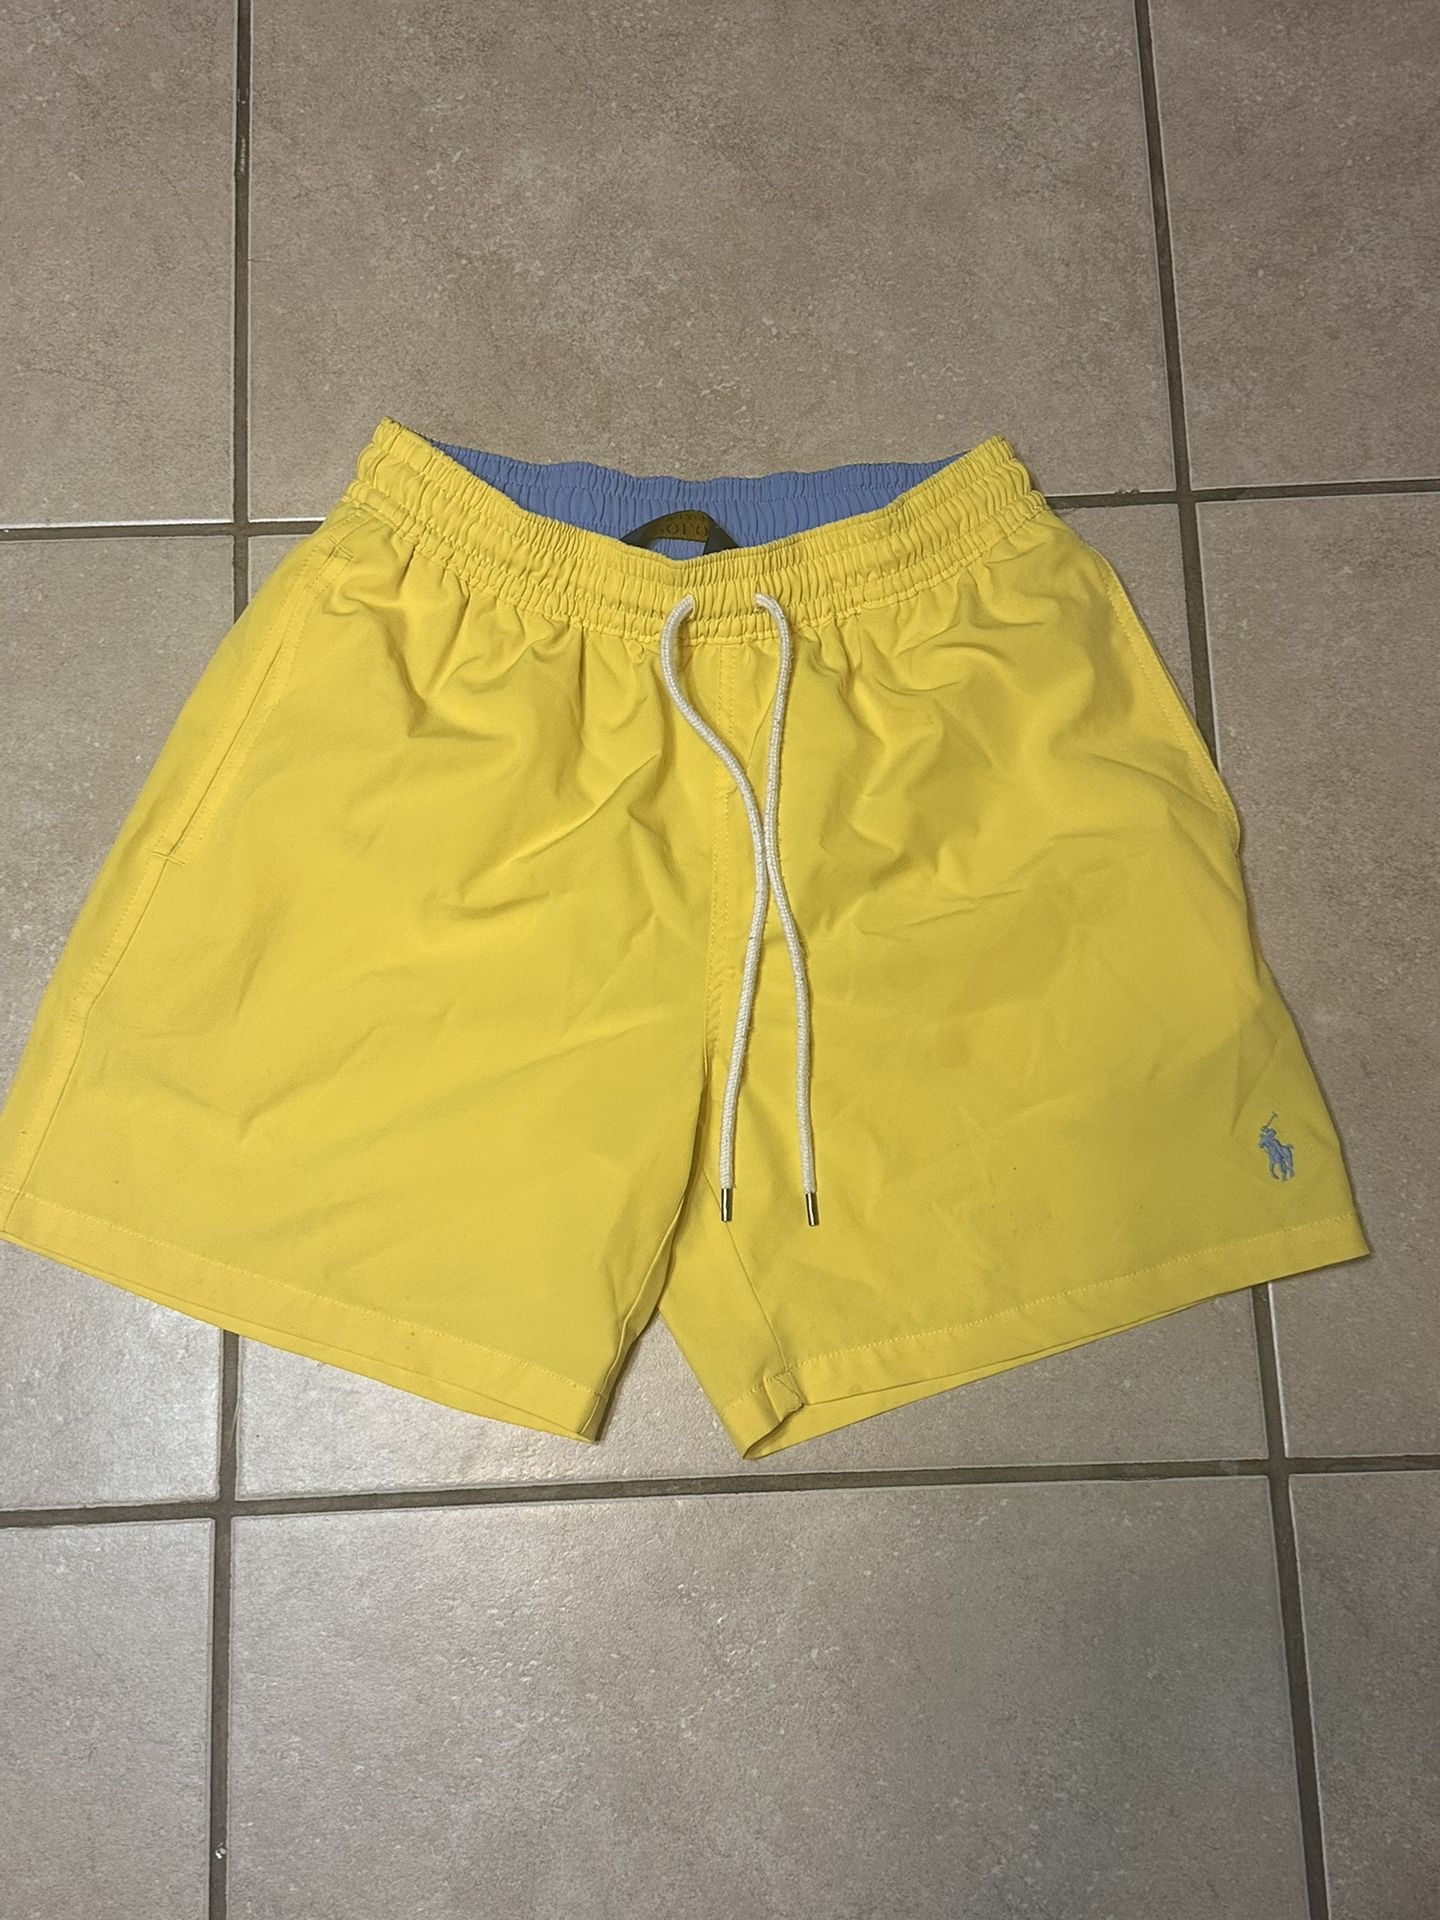 Yellow Polo Swim Trunks for Sale in Jacksonville, FL - OfferUp